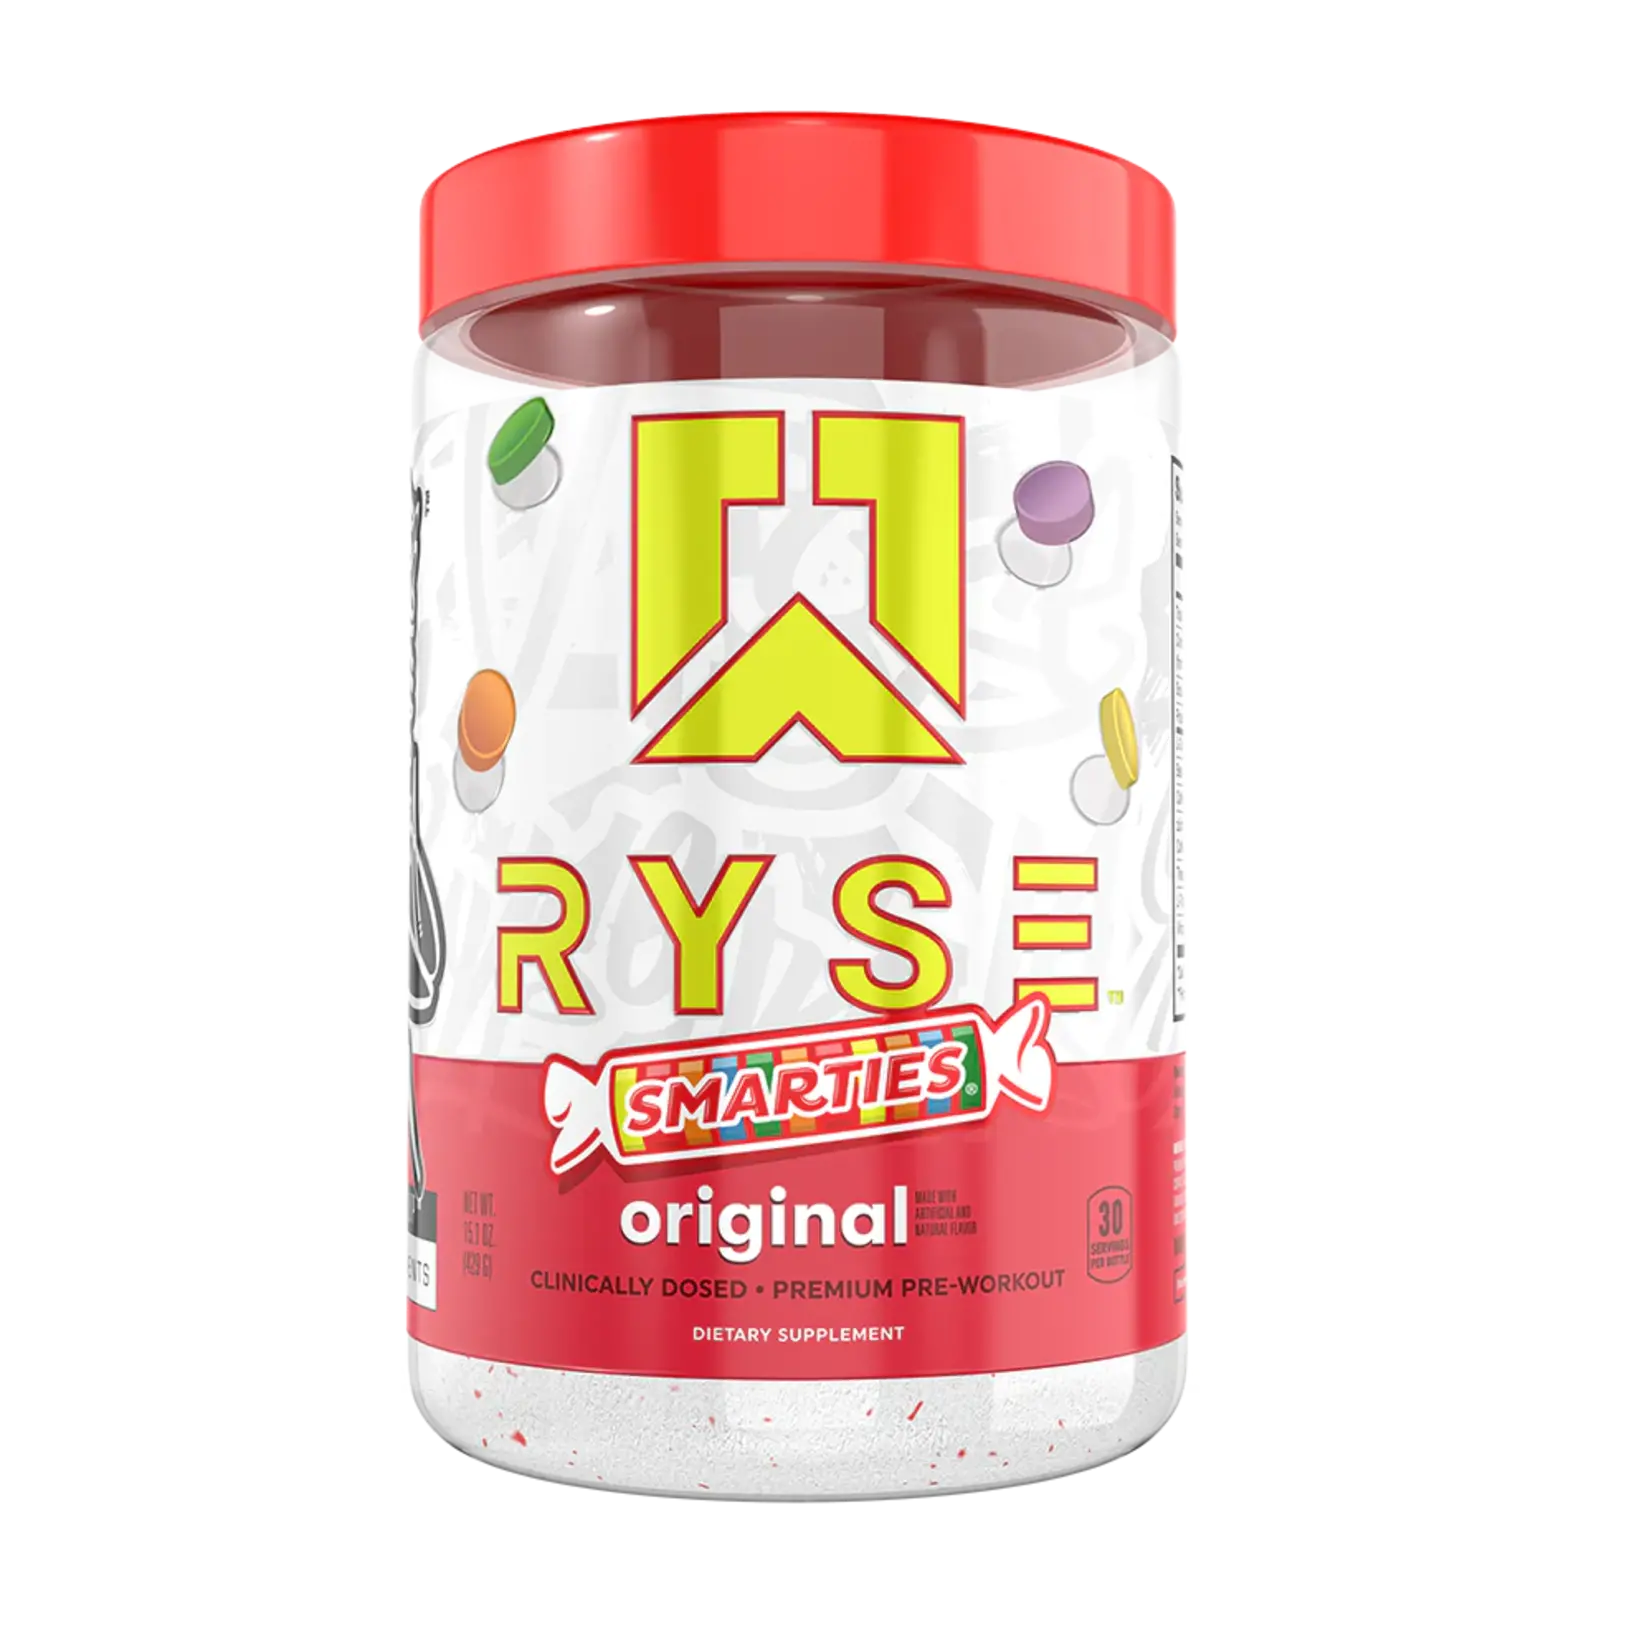 Ryse Ryse Loaded Pre Workout